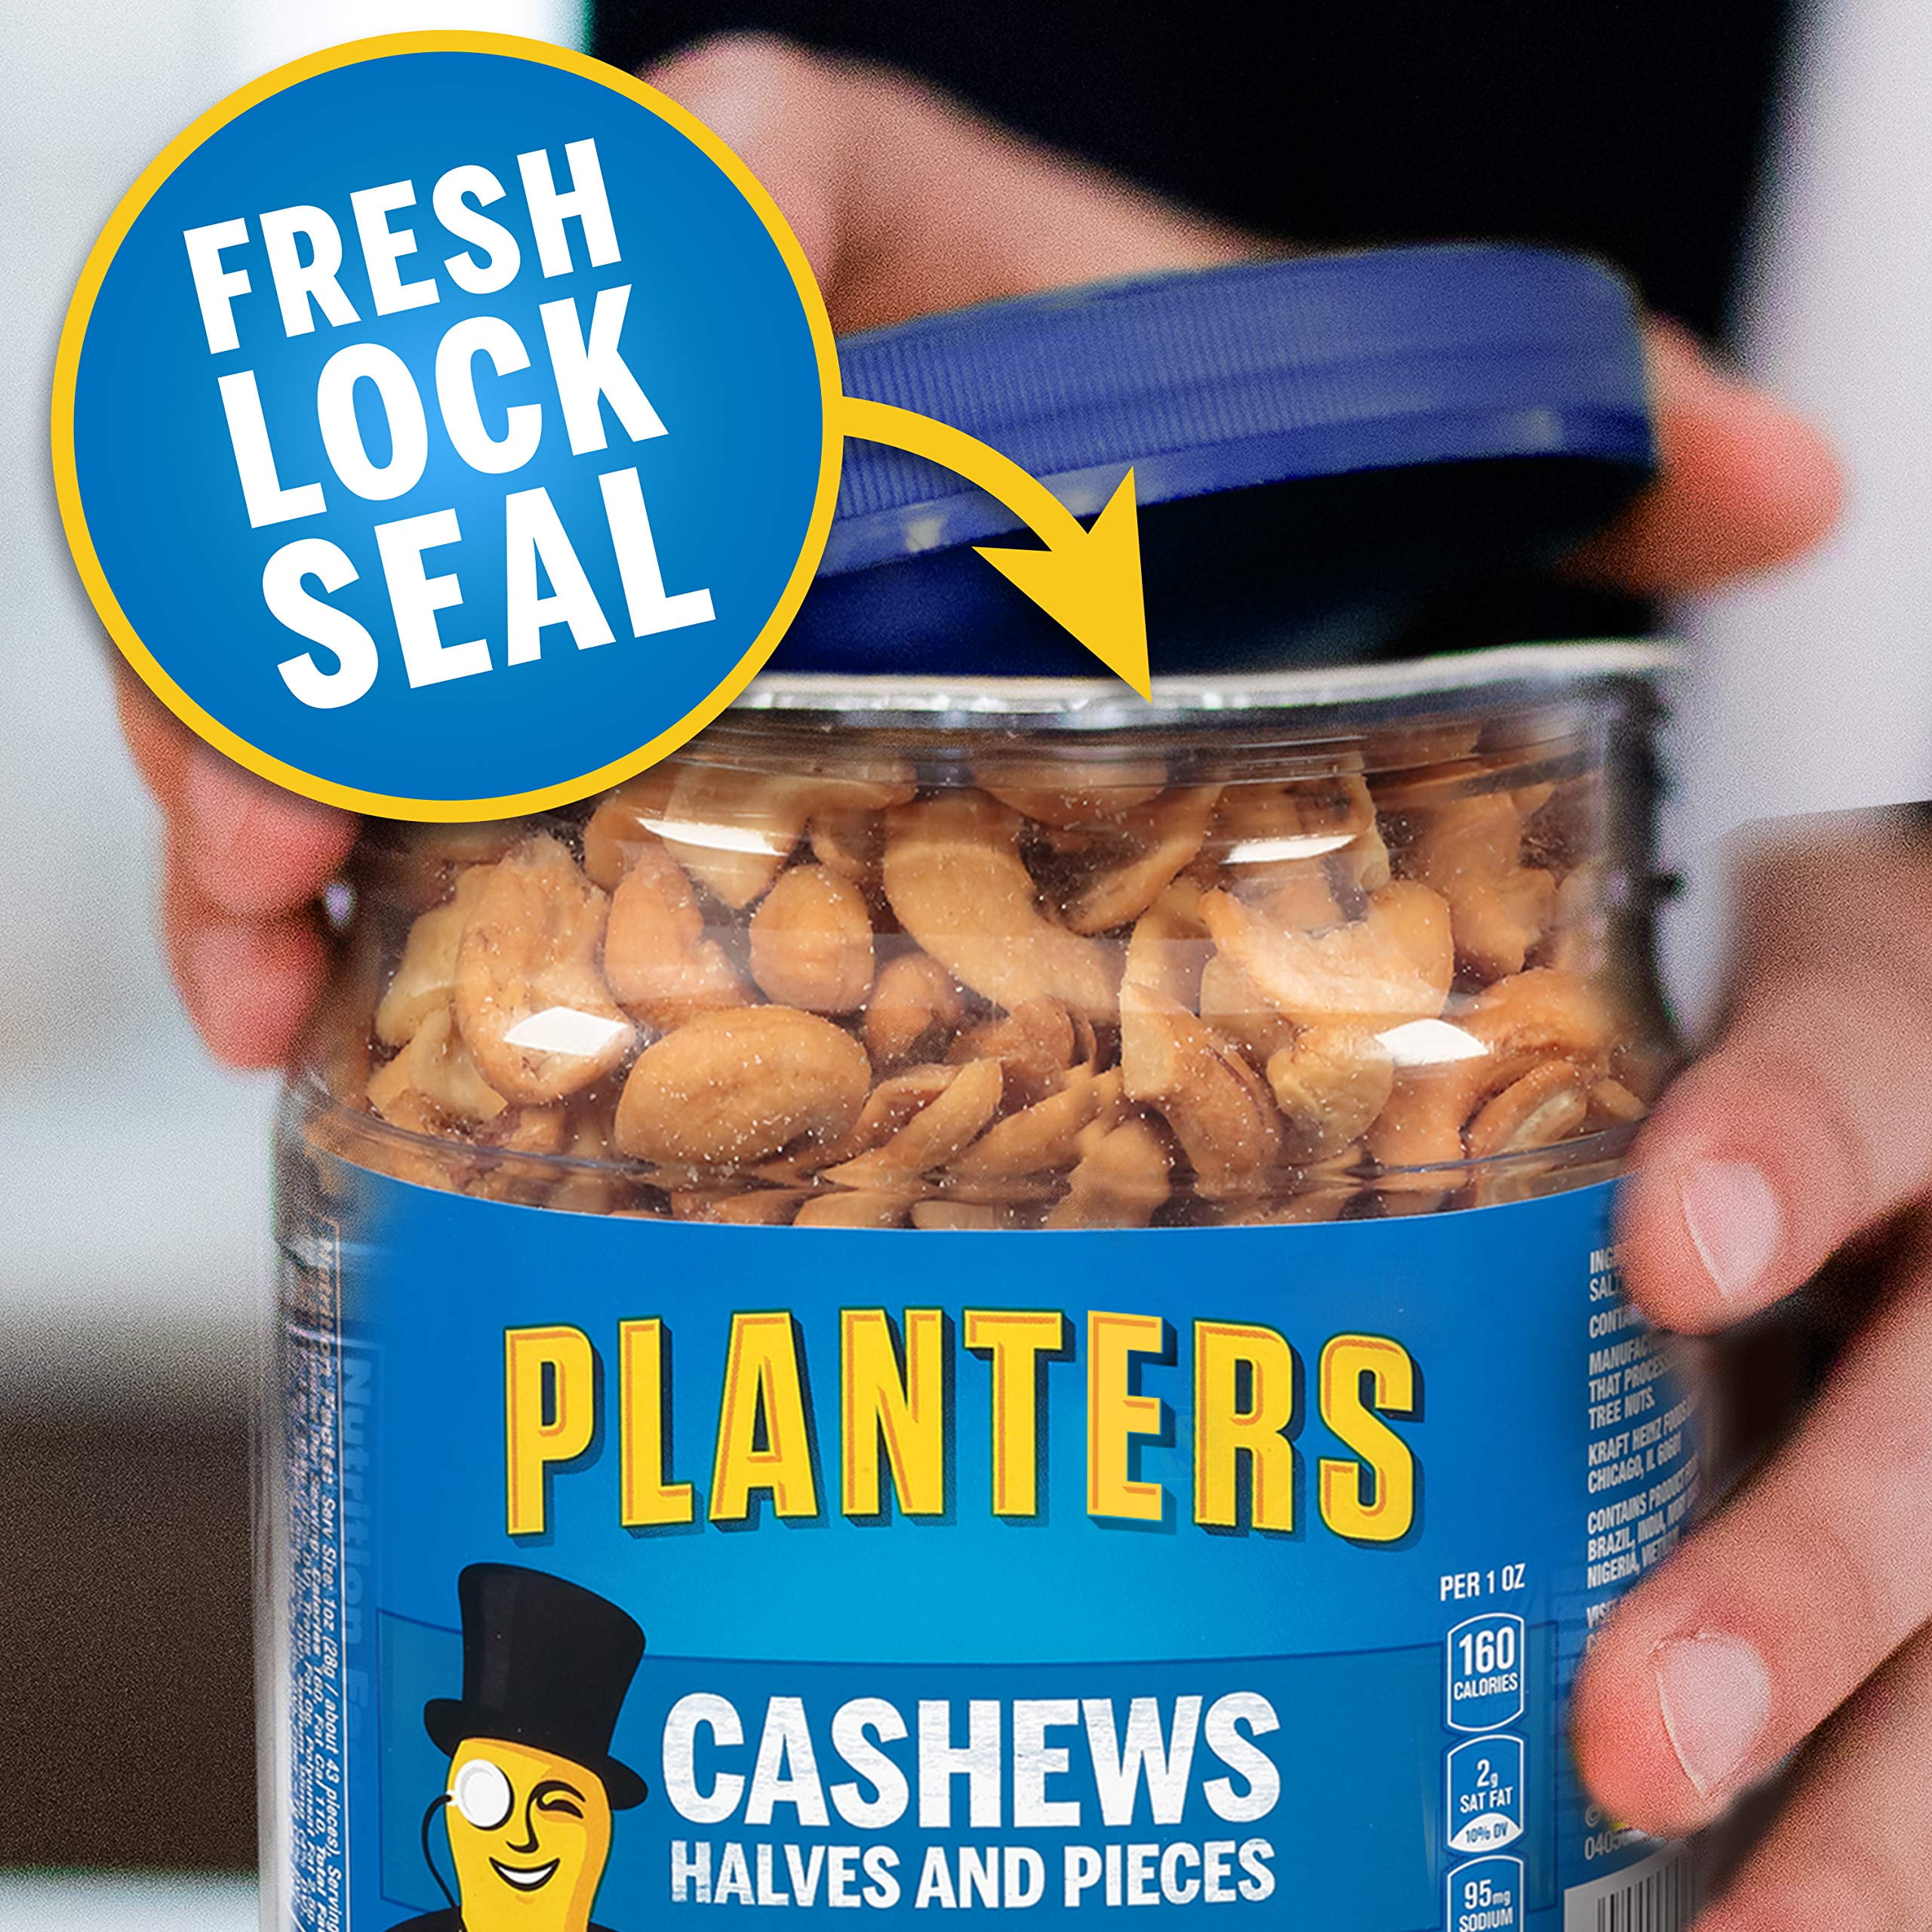 Resealable Canister Energy Snacks  Sn 26 oz Details about   PLANTERS Cashew Halves  Pieces 